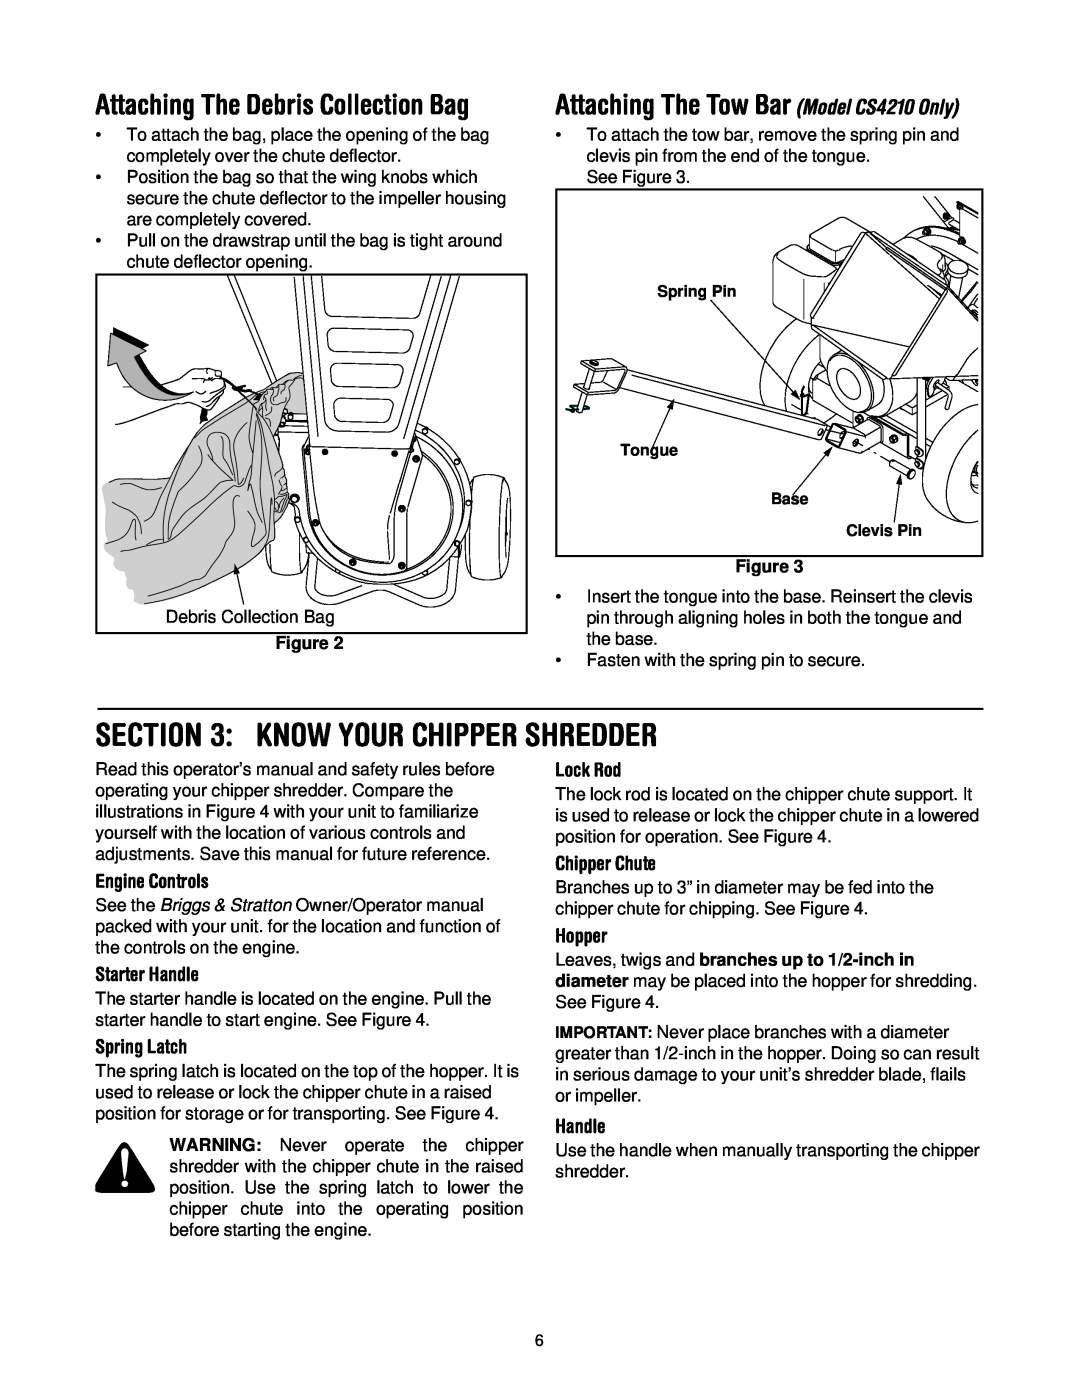 Troy-Bilt CS4265 Know Your Chipper Shredder, Attaching The Tow Bar Model CS4210 Only, Attaching The Debris Collection Bag 